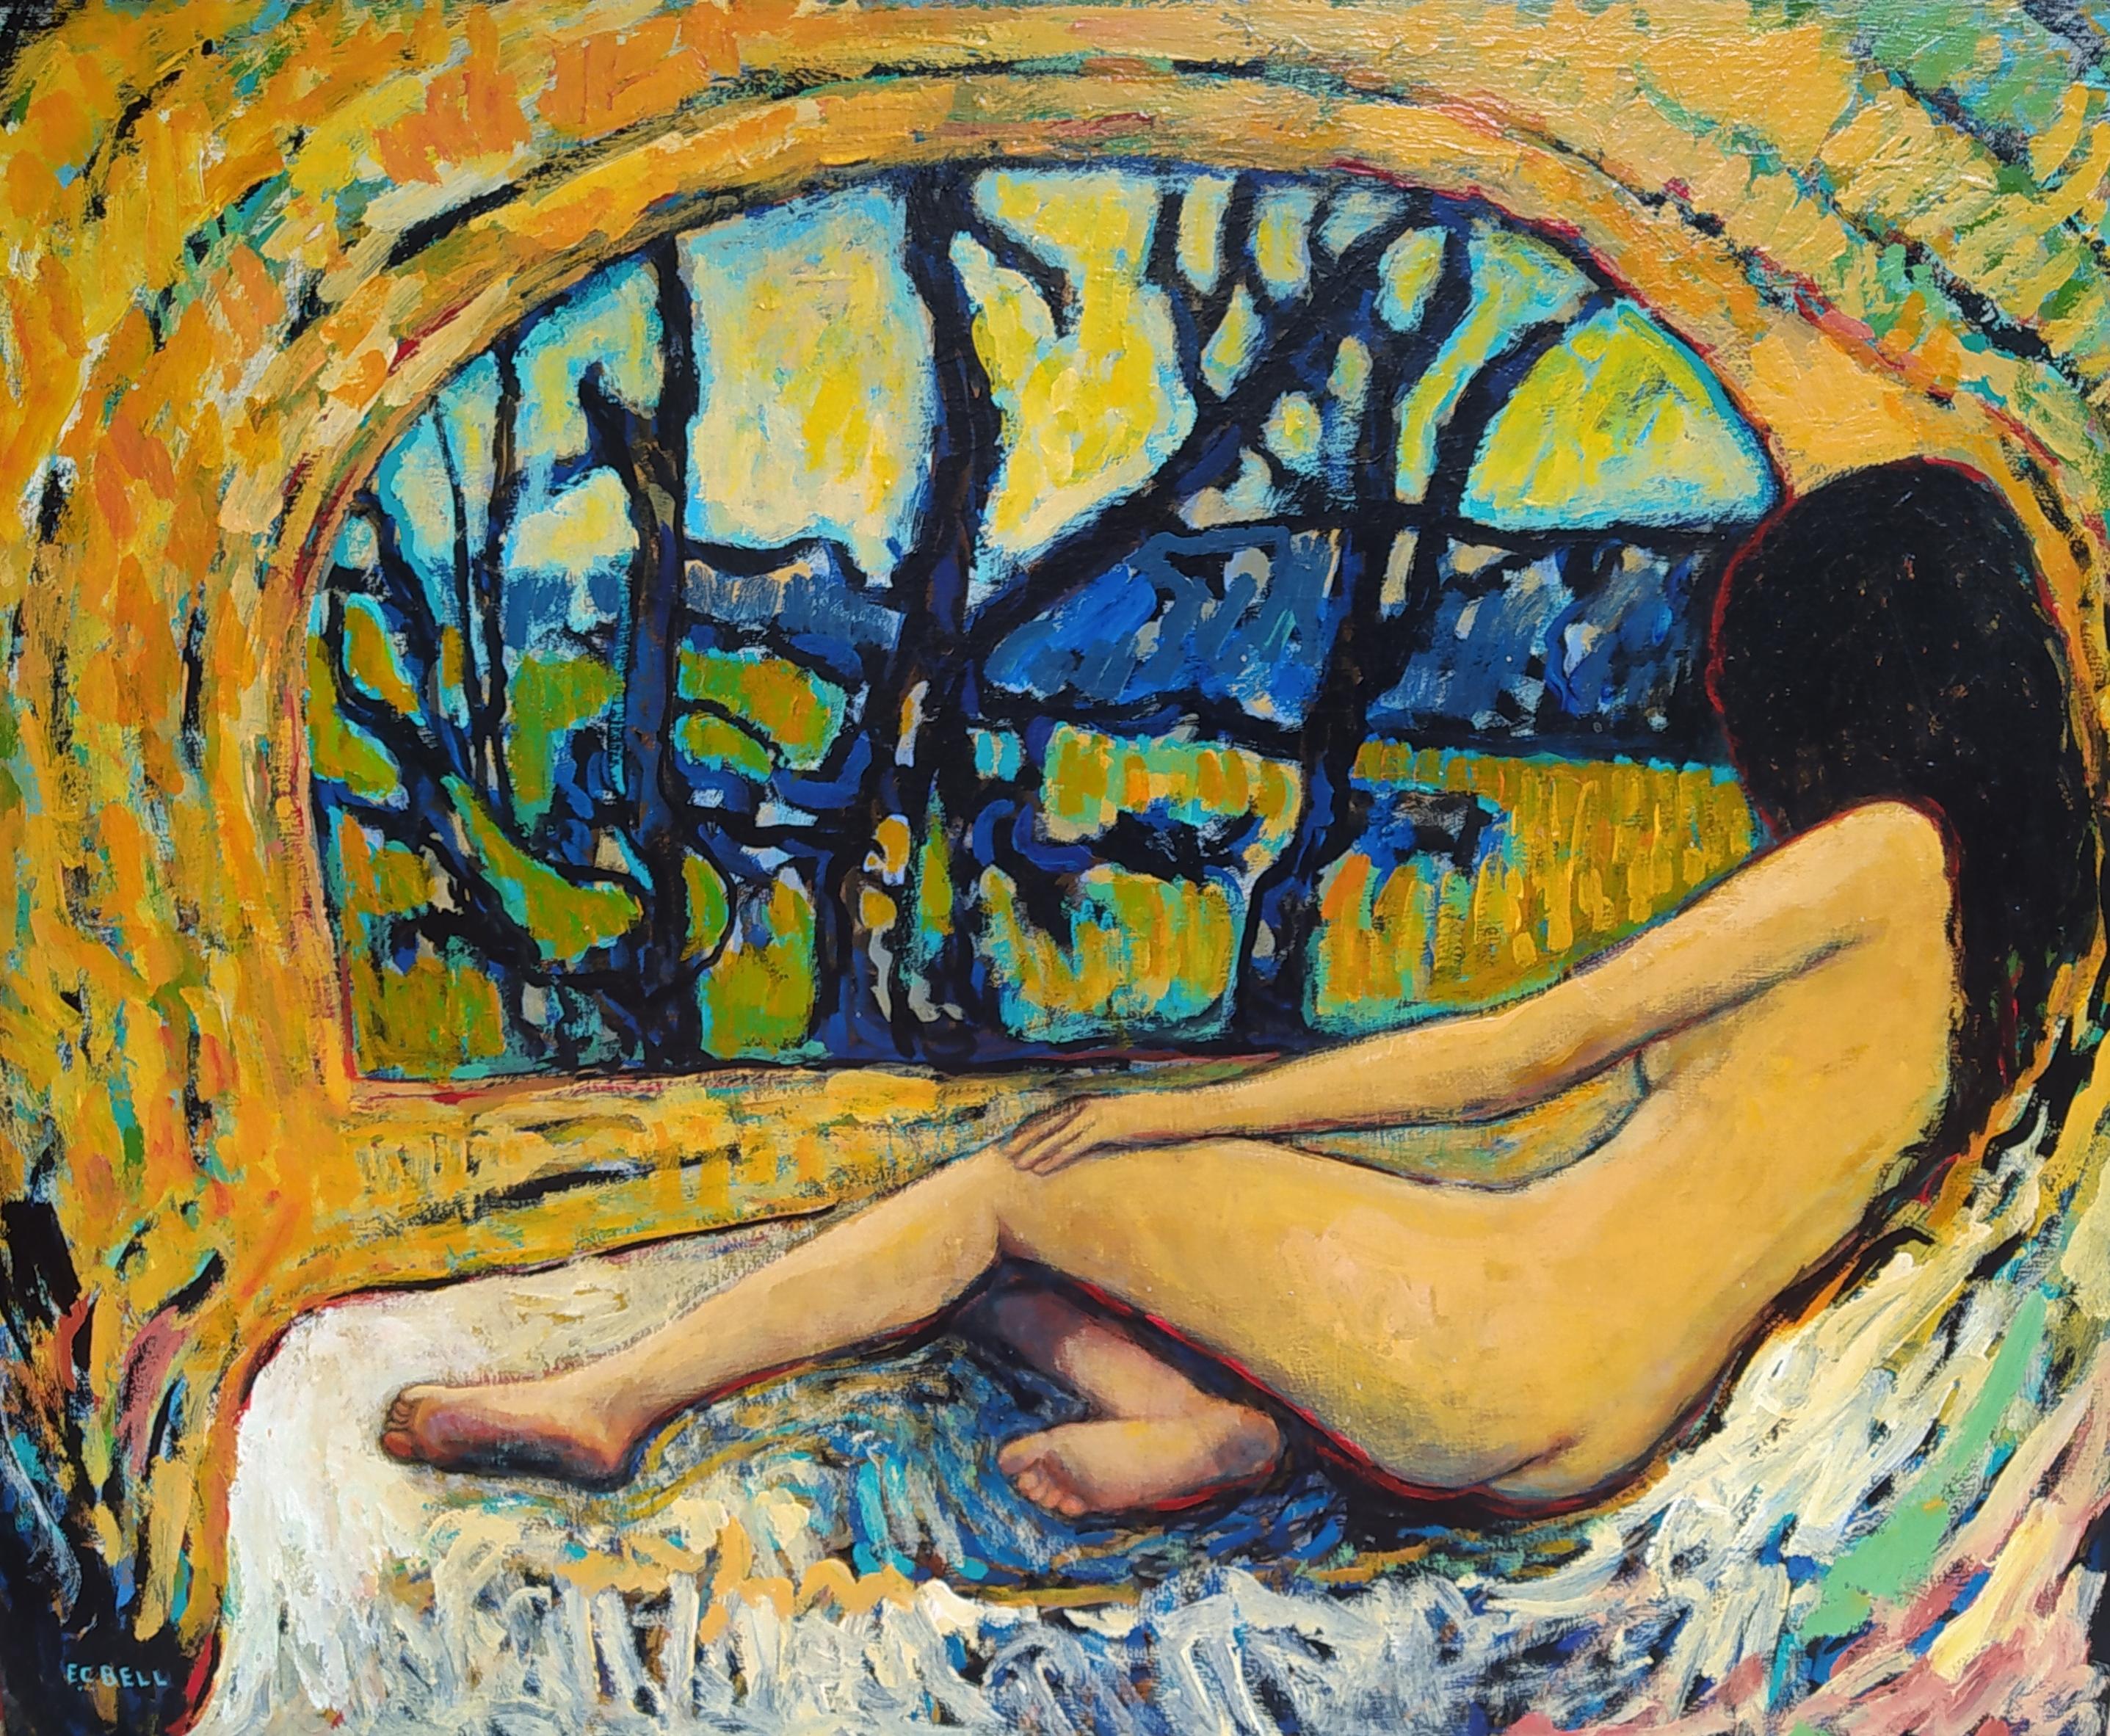 E.C. Bell Nude Painting - "Portal" - Horizontal expressionist landscape with female nude.